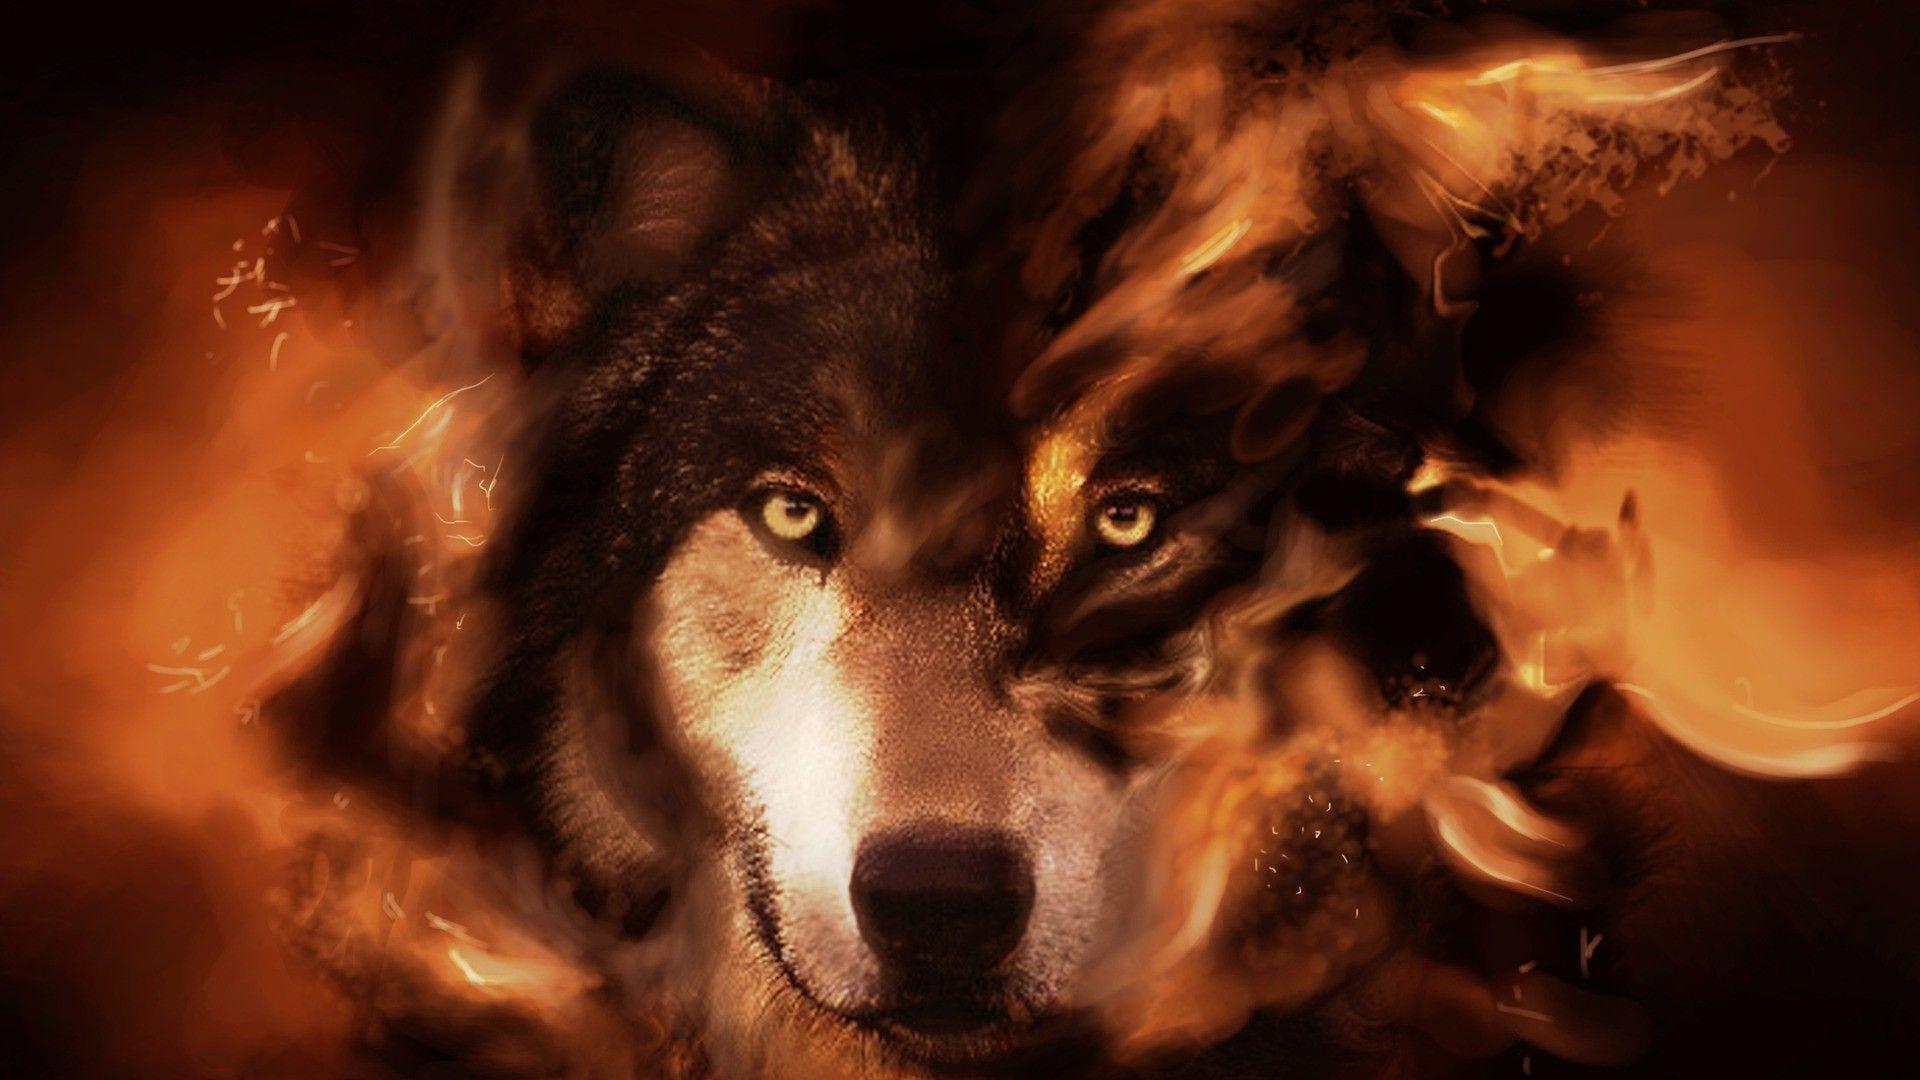 The Fire Wolf IPhone Wallpaper HD - IPhone Wallpapers : iPhone Wallpapers  in 2023 | Wolf wallpaper, Wolf spirit animal, Wolf pictures